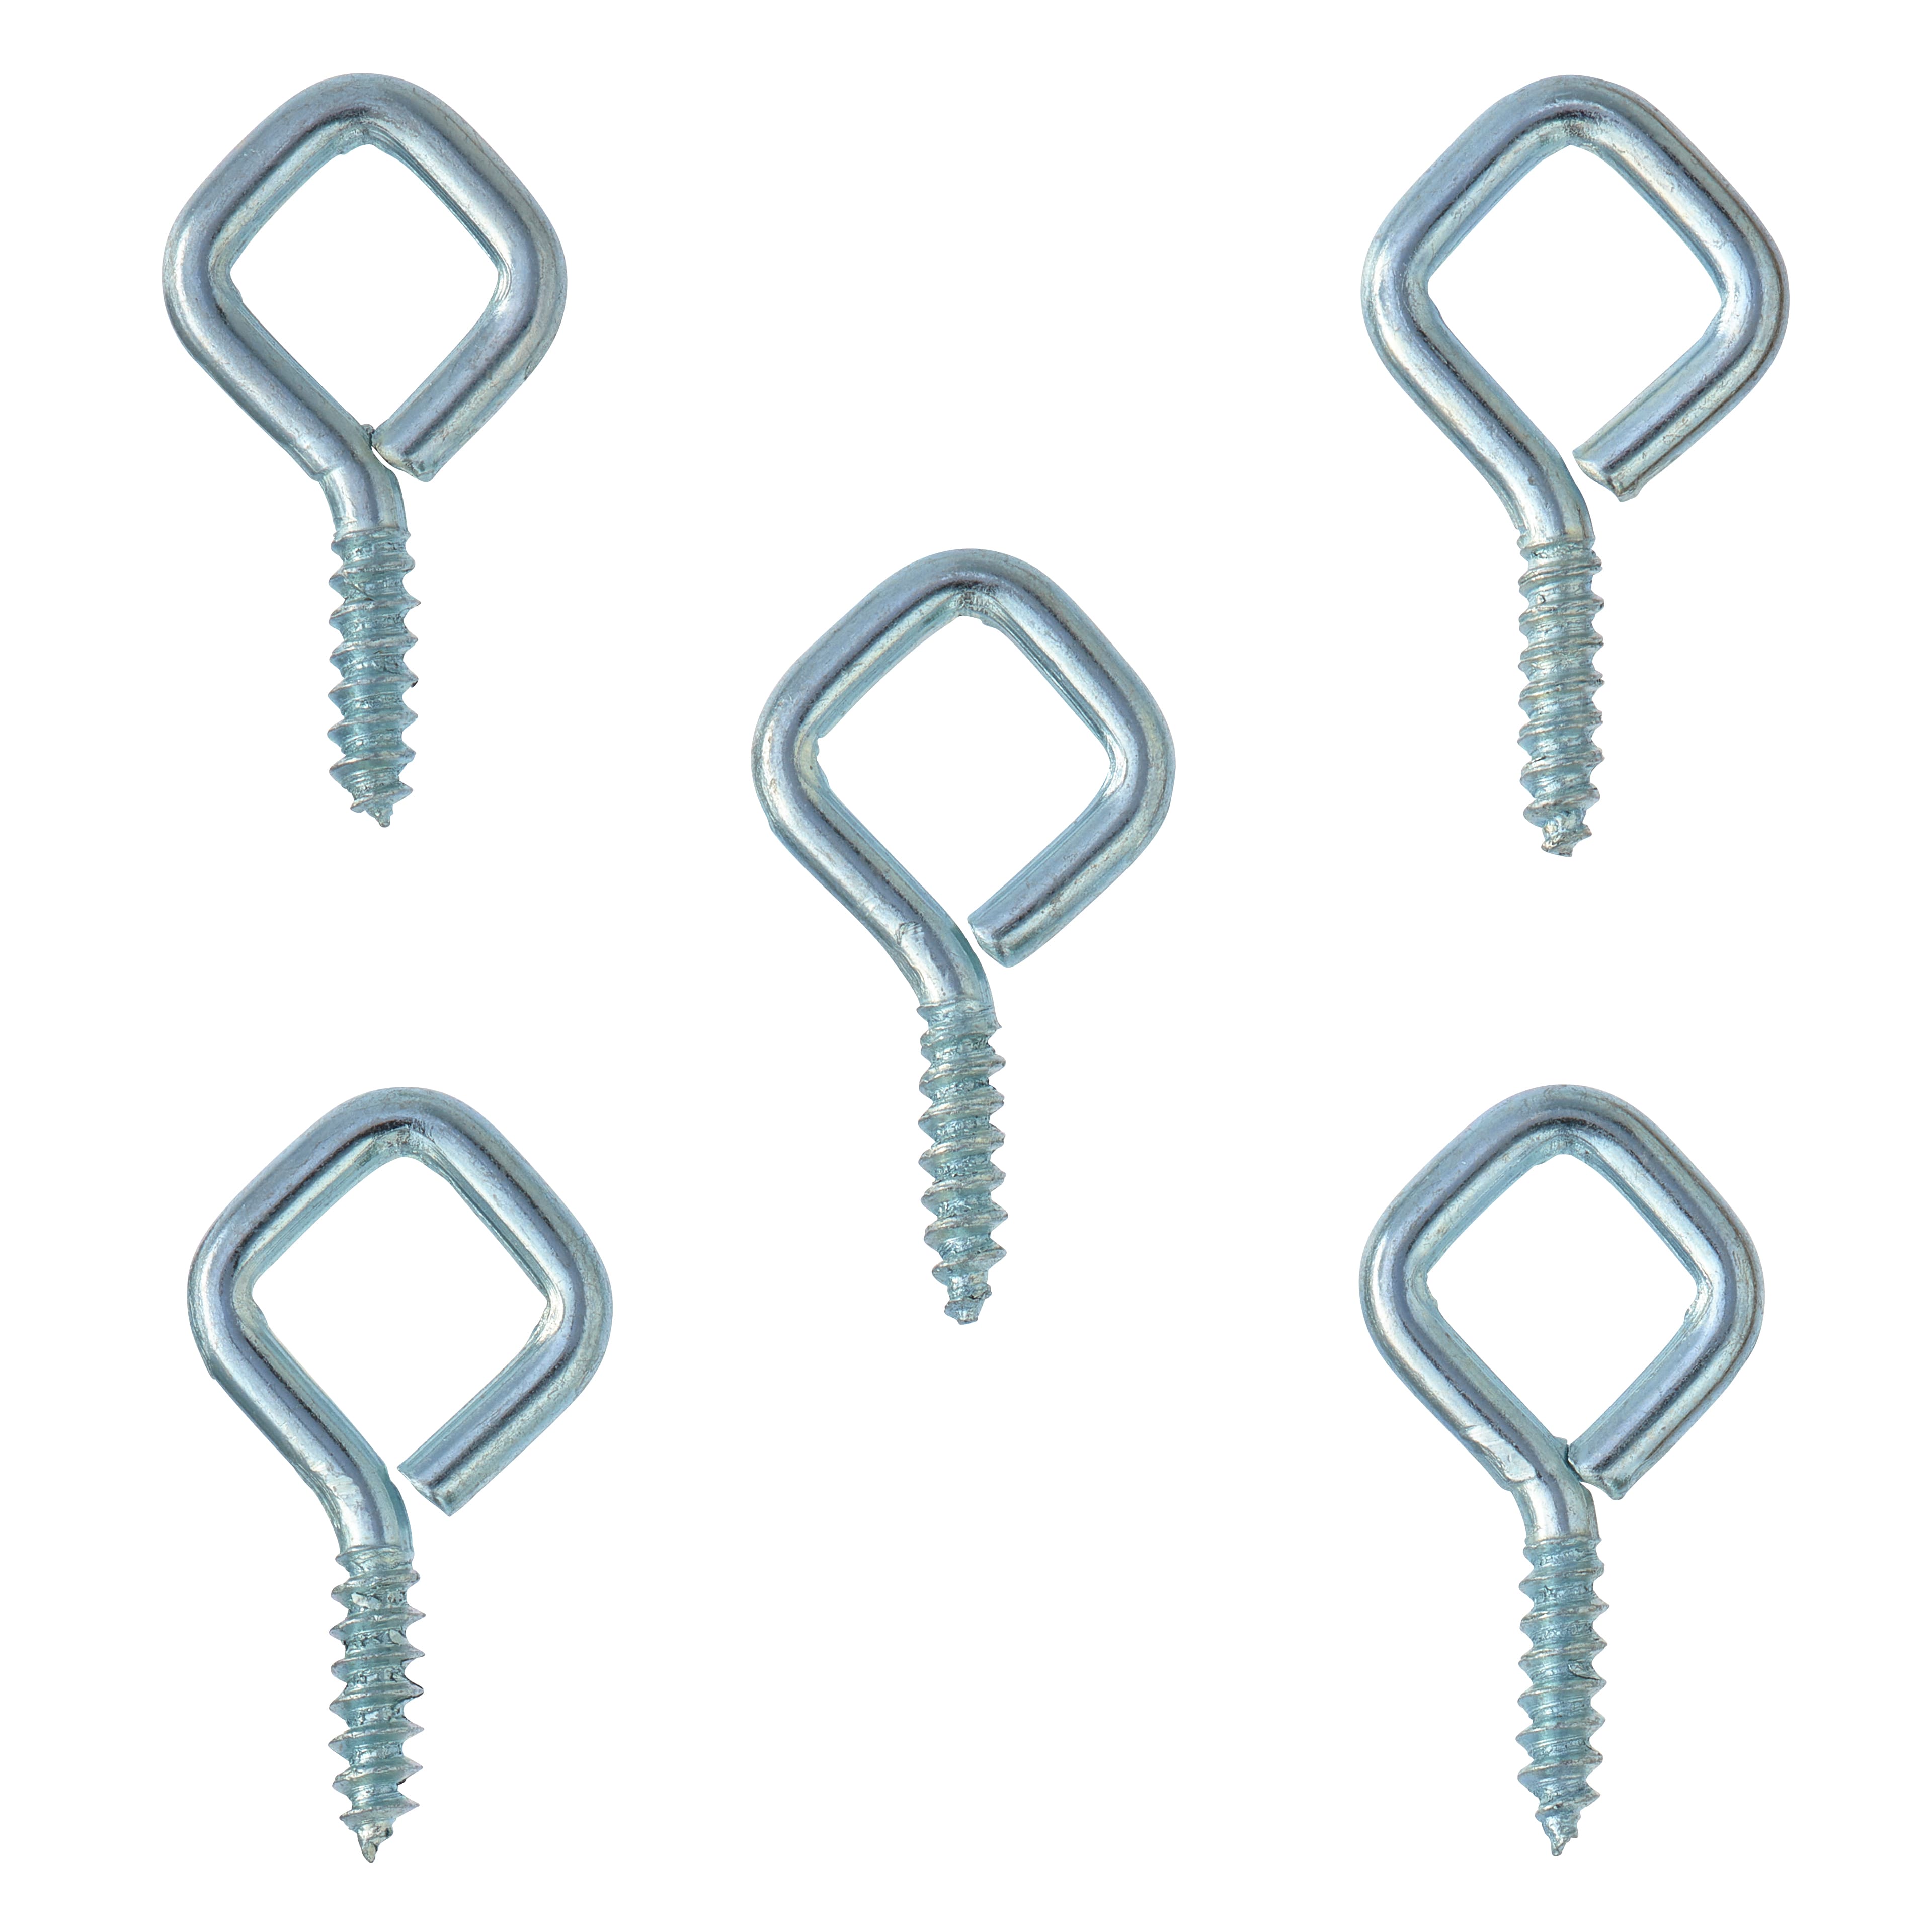 MICRO SCREW EYES - SCREW PRODUCTS - INSTALLATION ITEMS